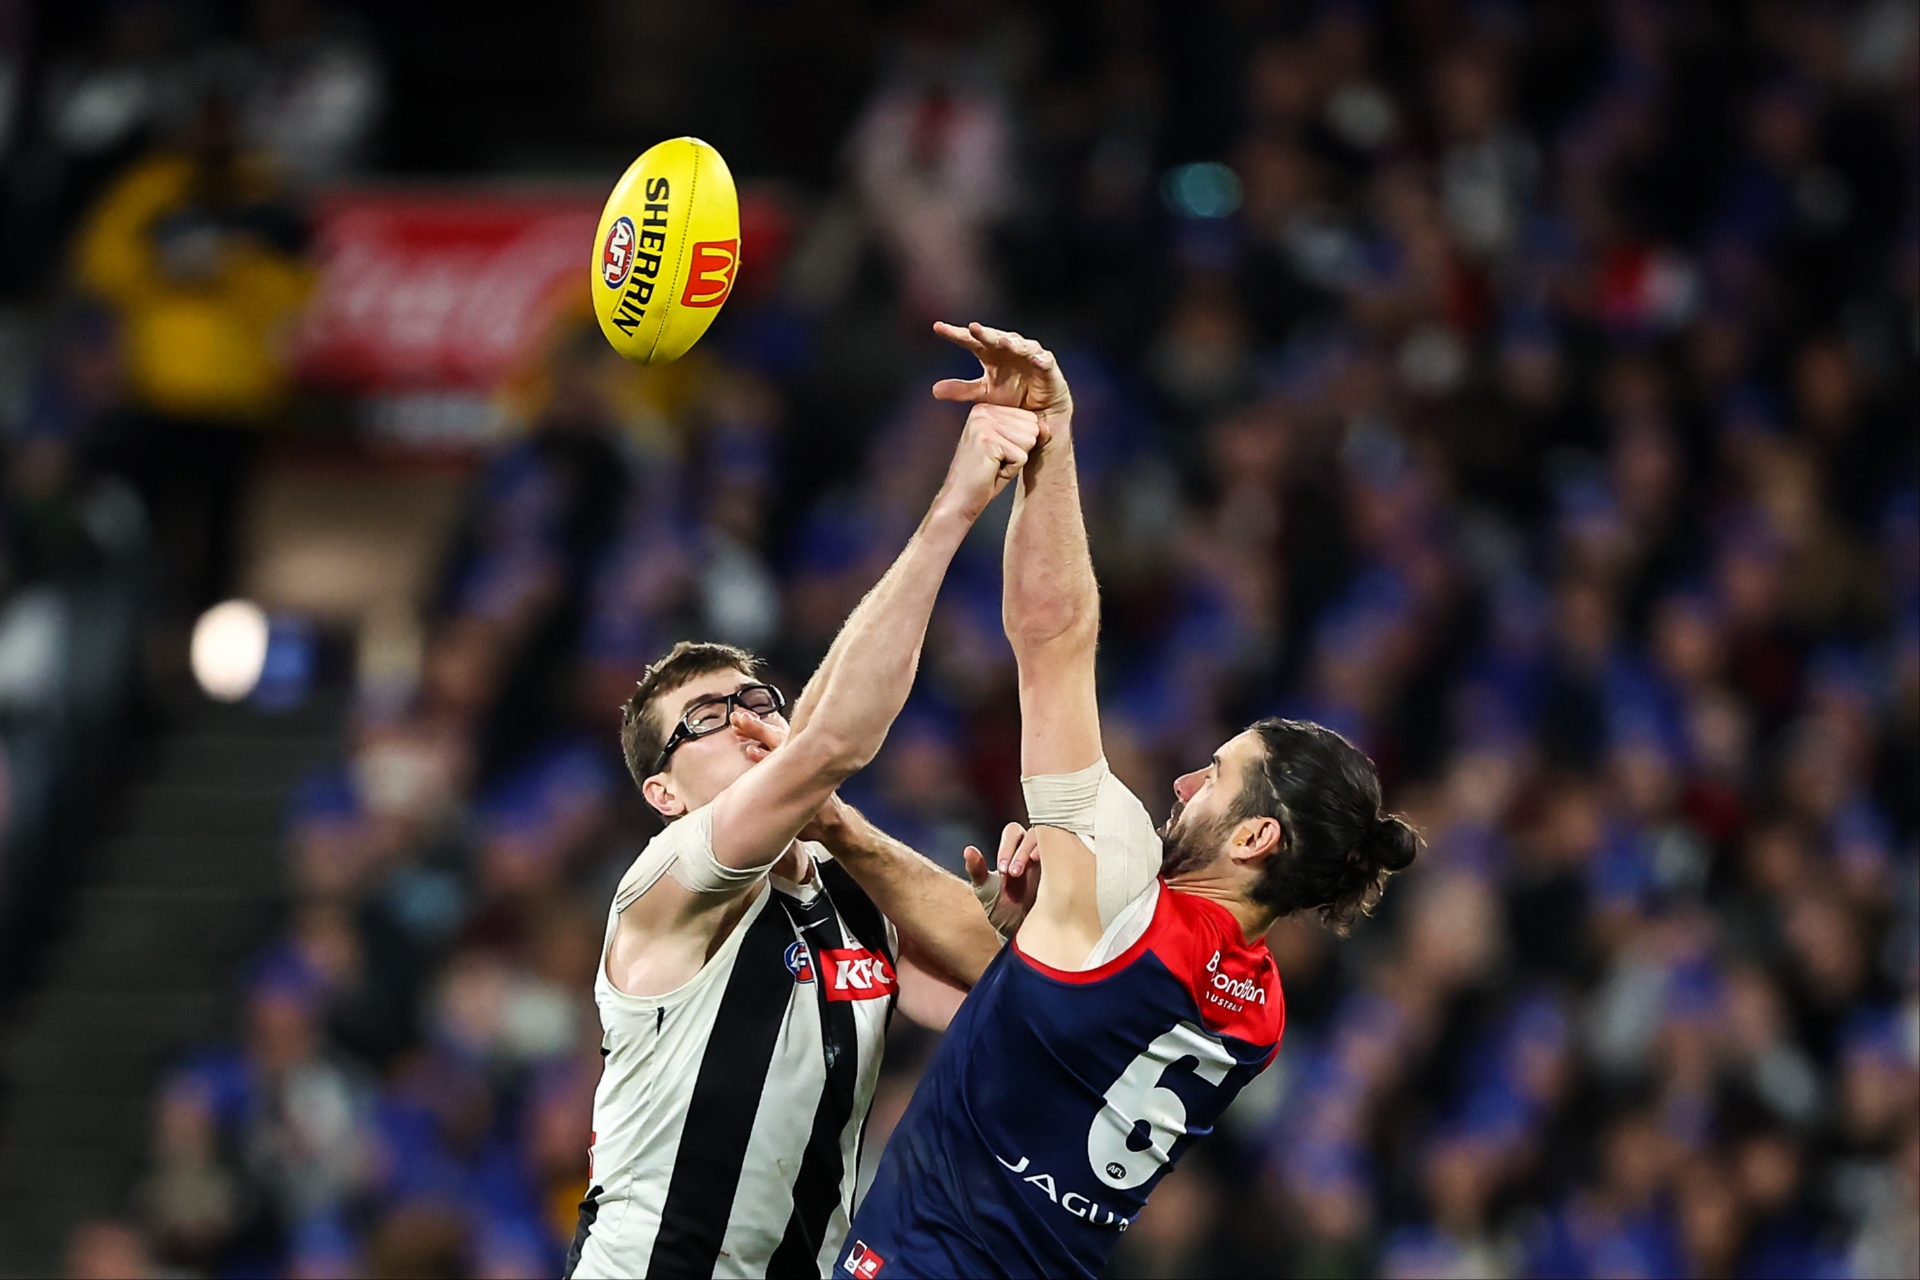 Dees to down Blues + Pies at the line? AFL Round 12 Best Bets!